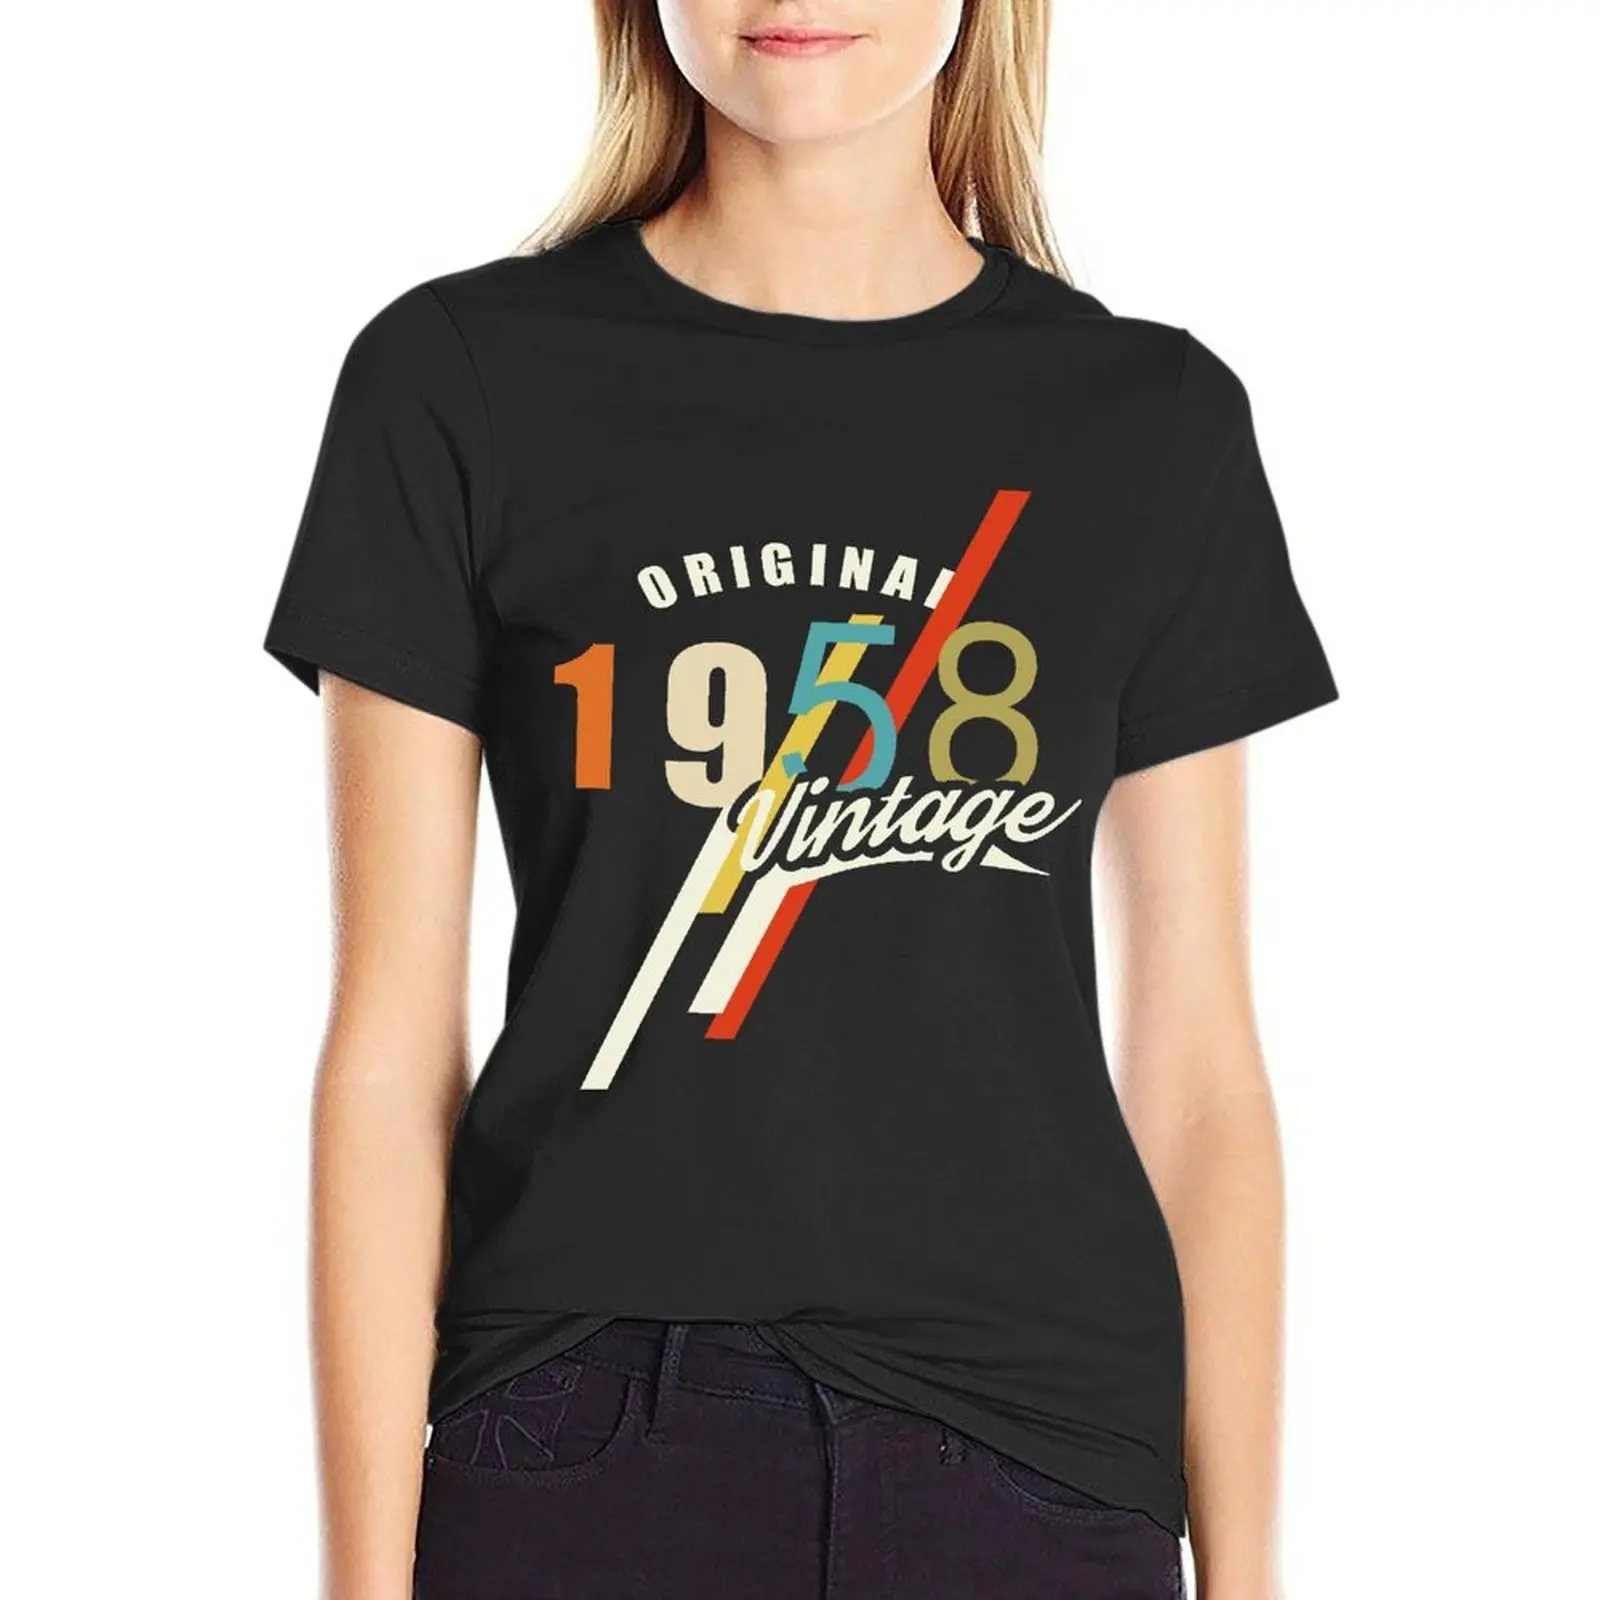 Vintage 1958 Gift Father'S Day Oversized T-Shirts Custom Women'S Clothes 100% Cotton Streetwear Large Size Tops Tee